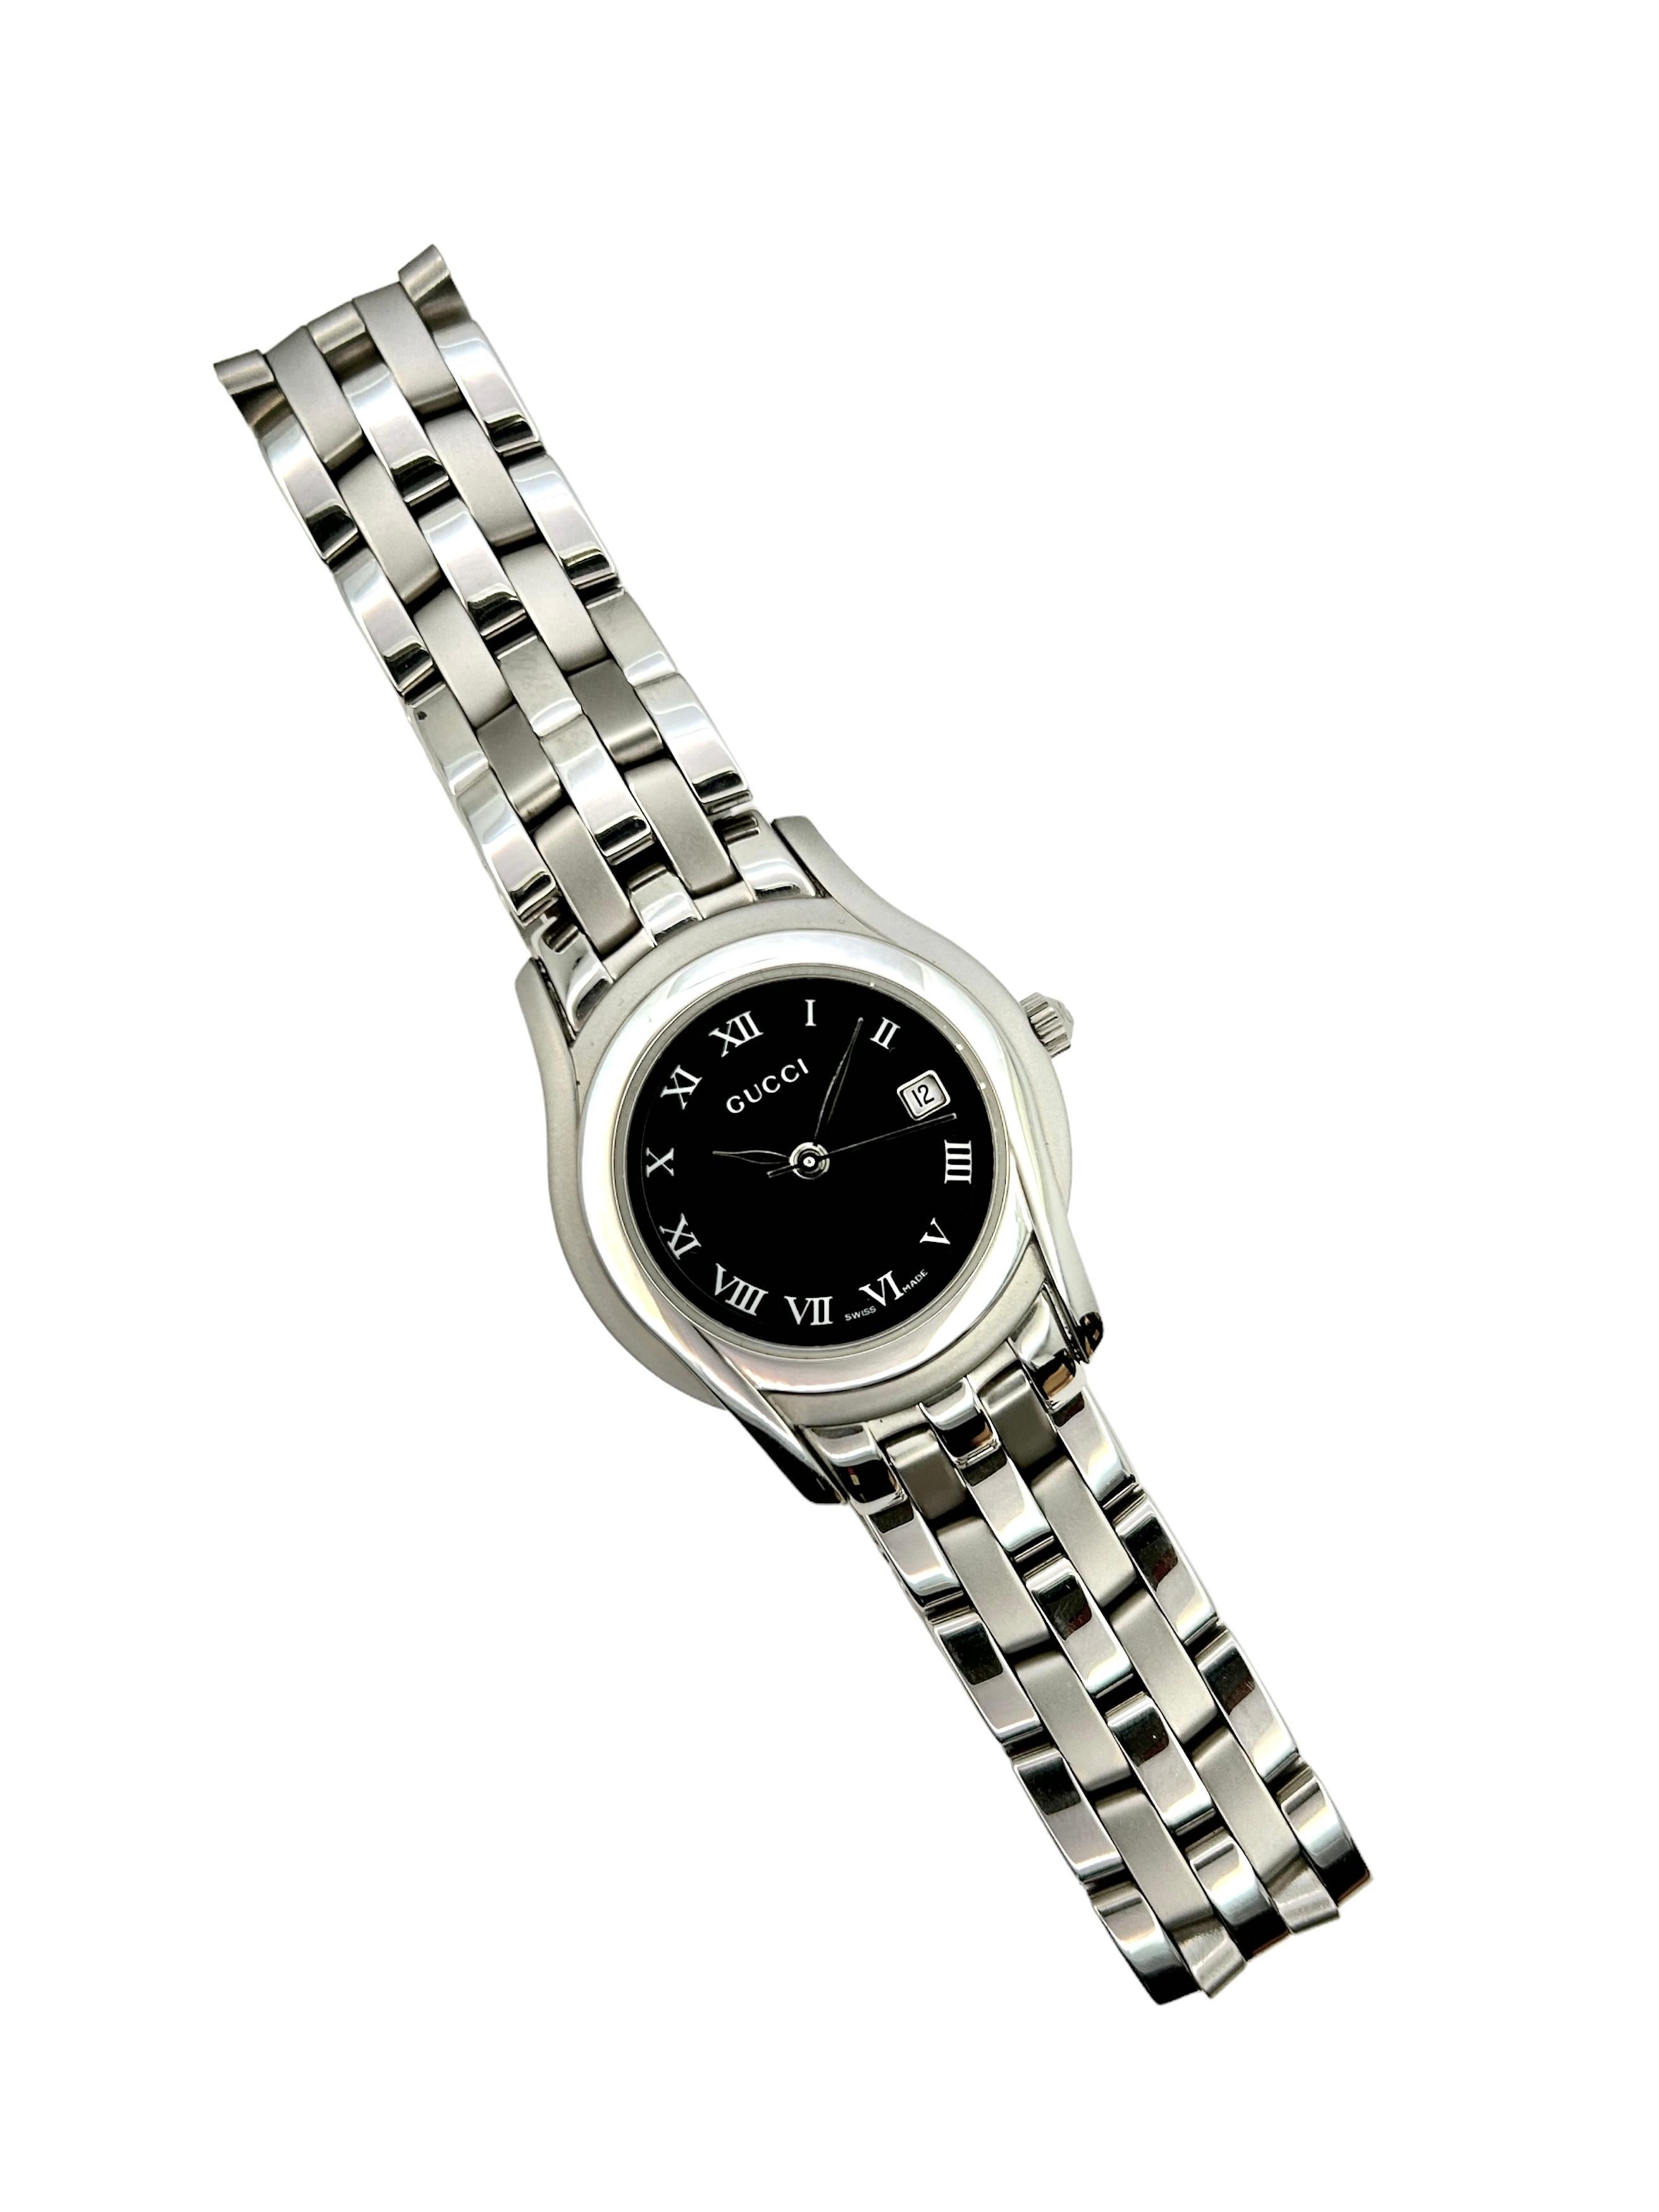 New Gucci women's quartz stainless steel Swiss Made watch.
The 'watch has never been worn and comes from an authorized Italian seller.

Accompanied by box and Gucci international warranty.
In addition, it is possible to customize the size of the